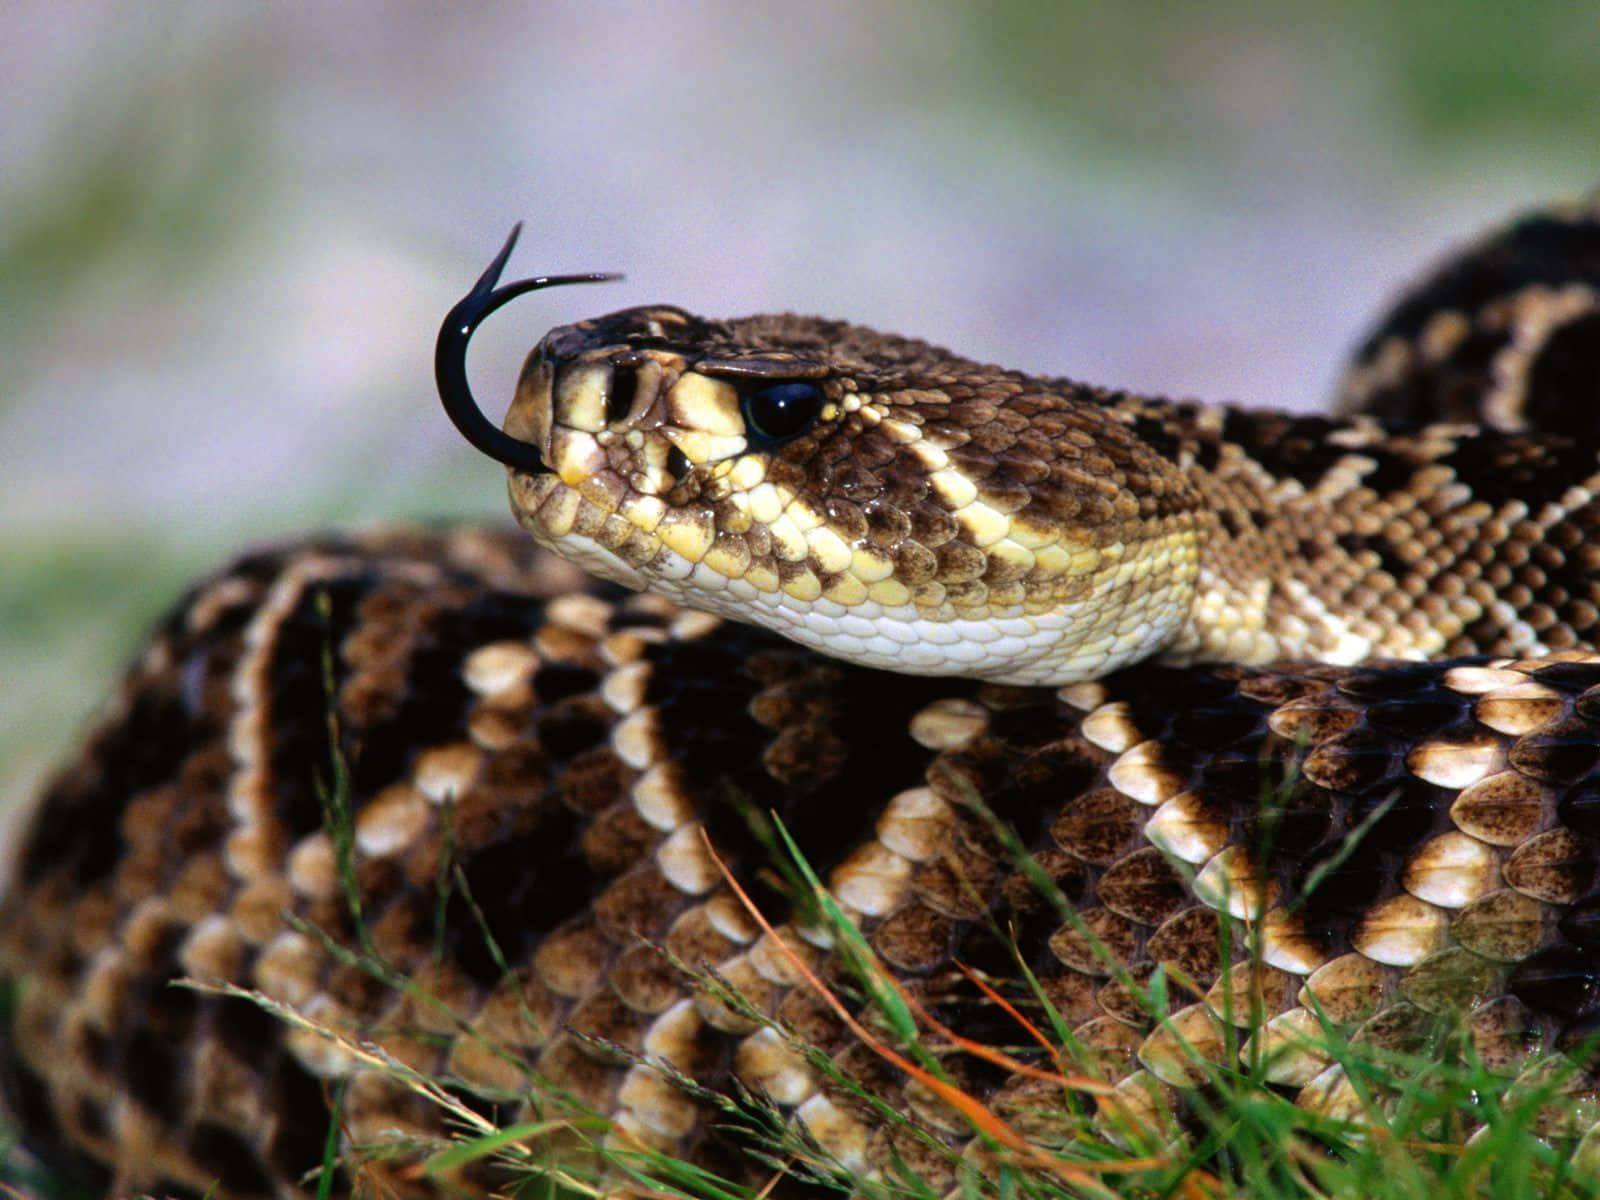 A Rattlesnake Is Sitting On The Grass